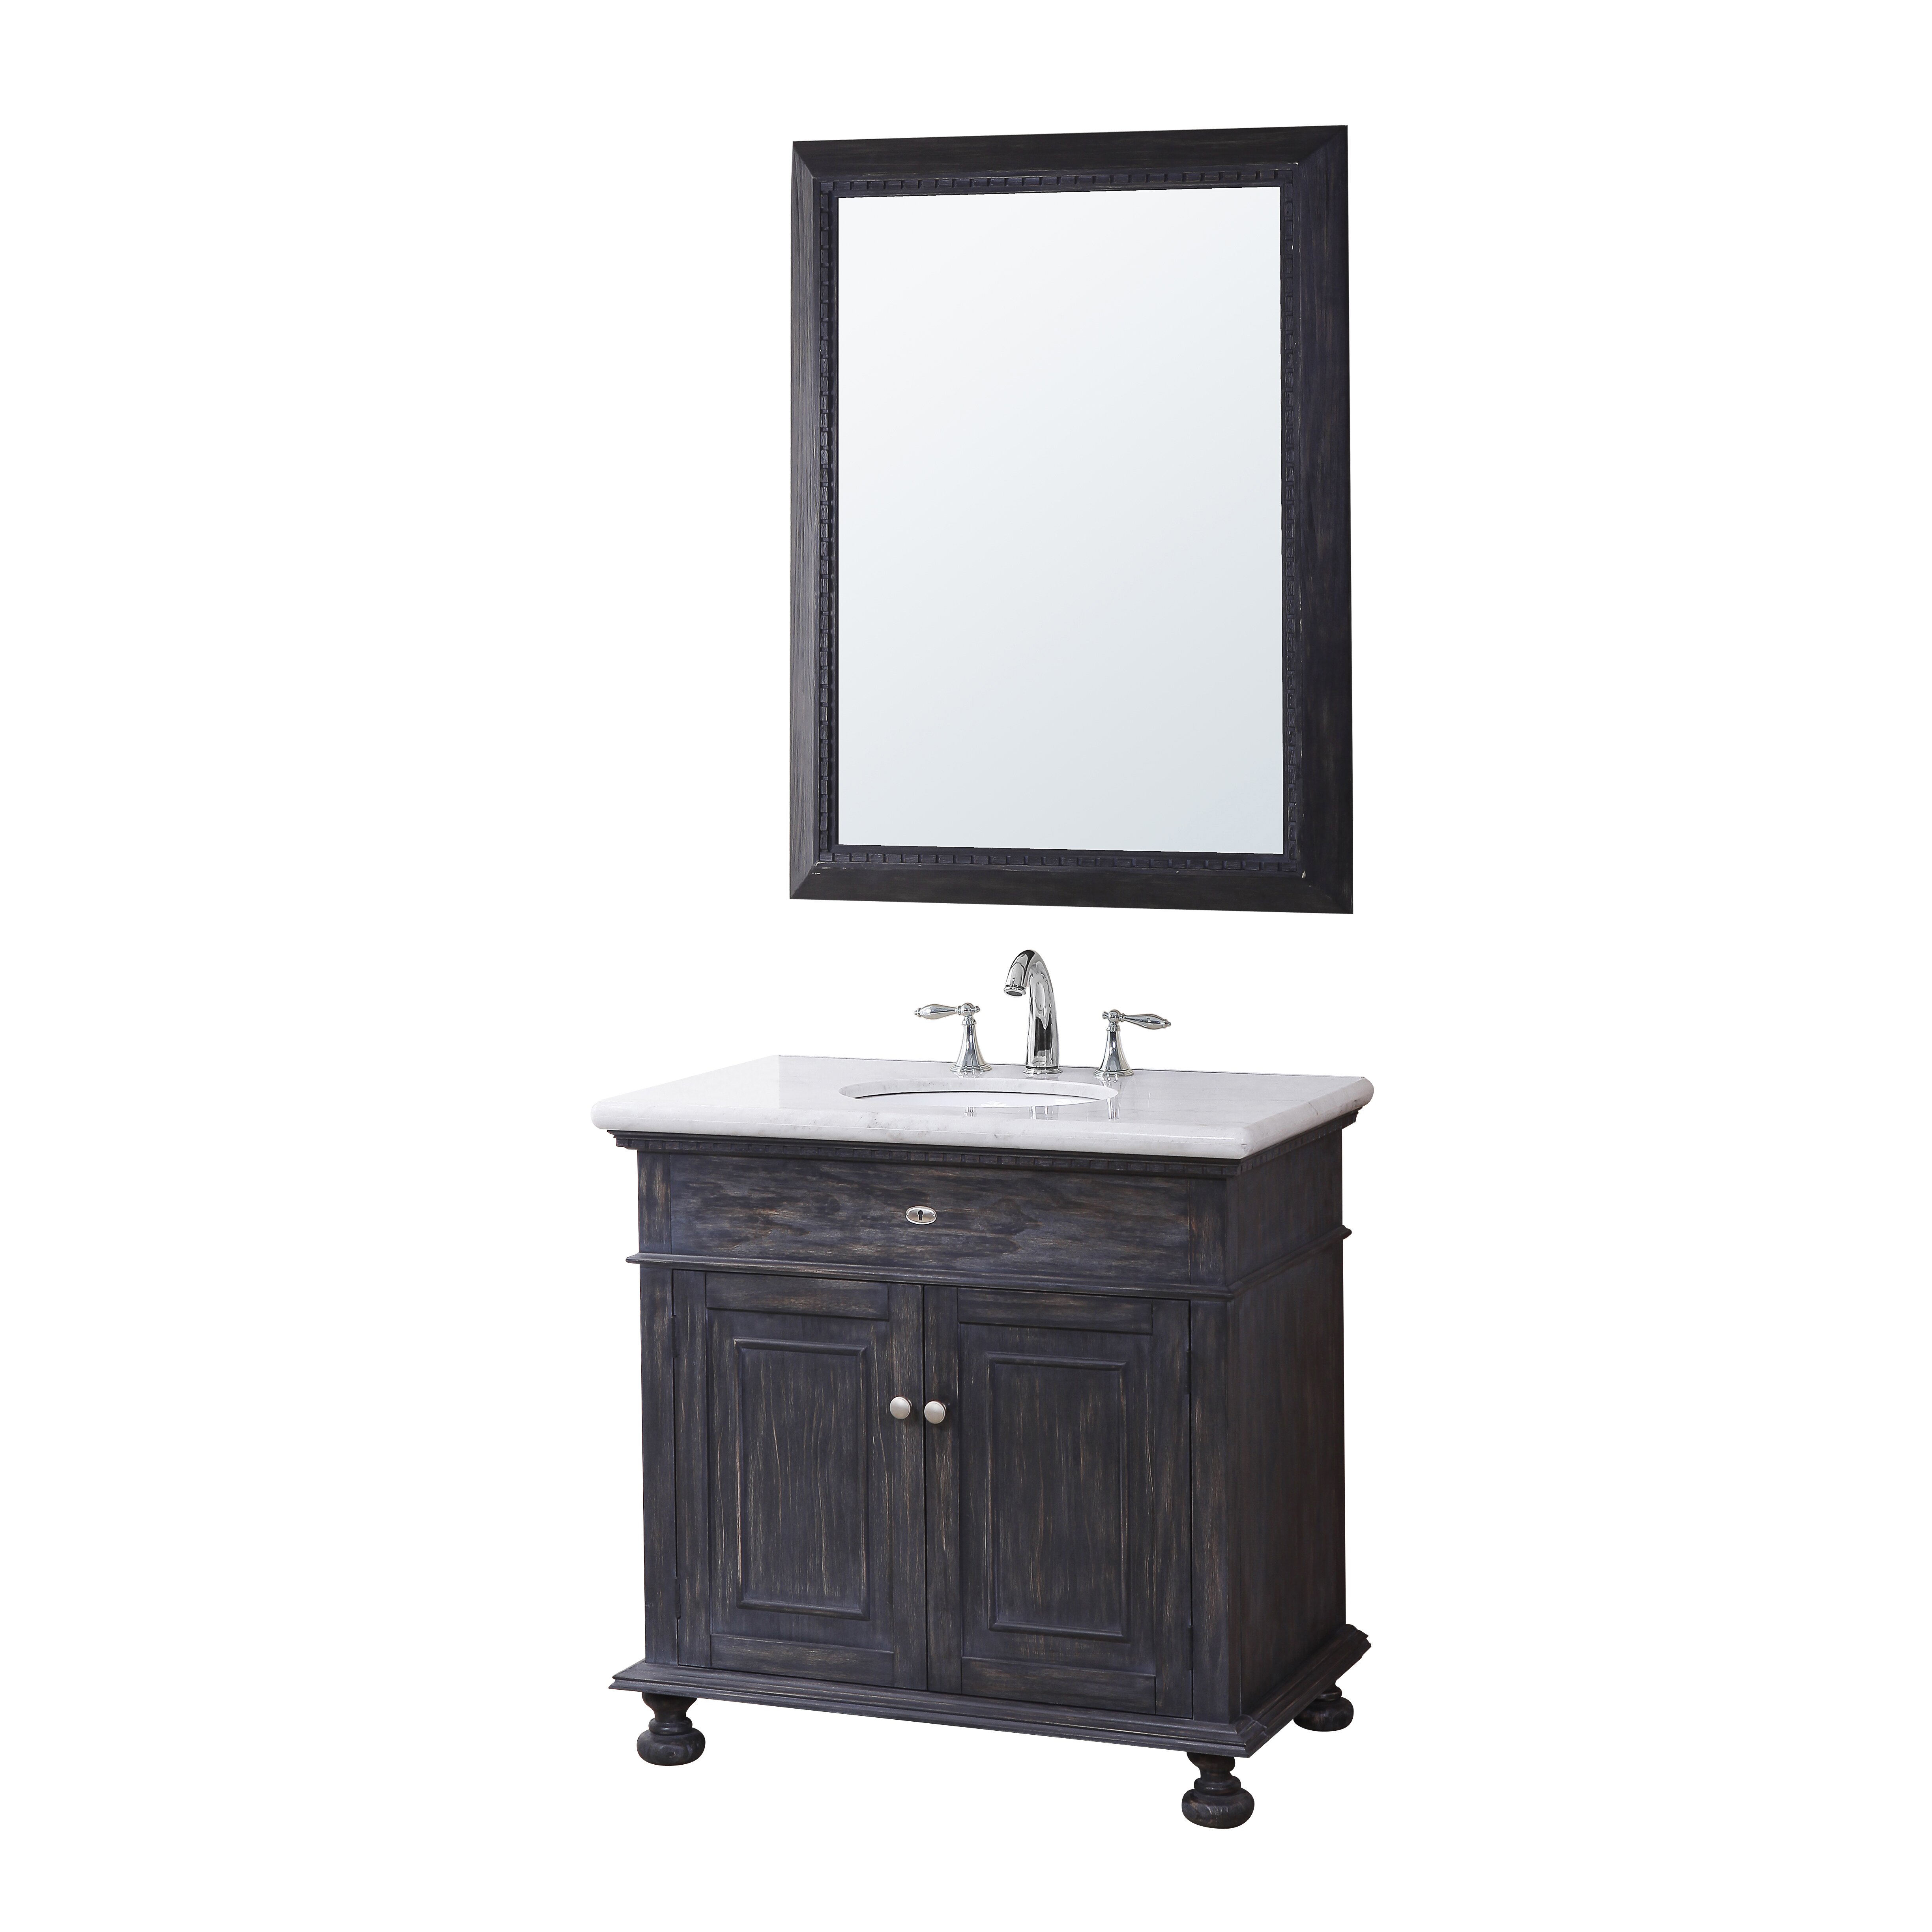 Lincoln 35quot; Bathroom Vanity Set with Mirror by Crawford amp; Burke